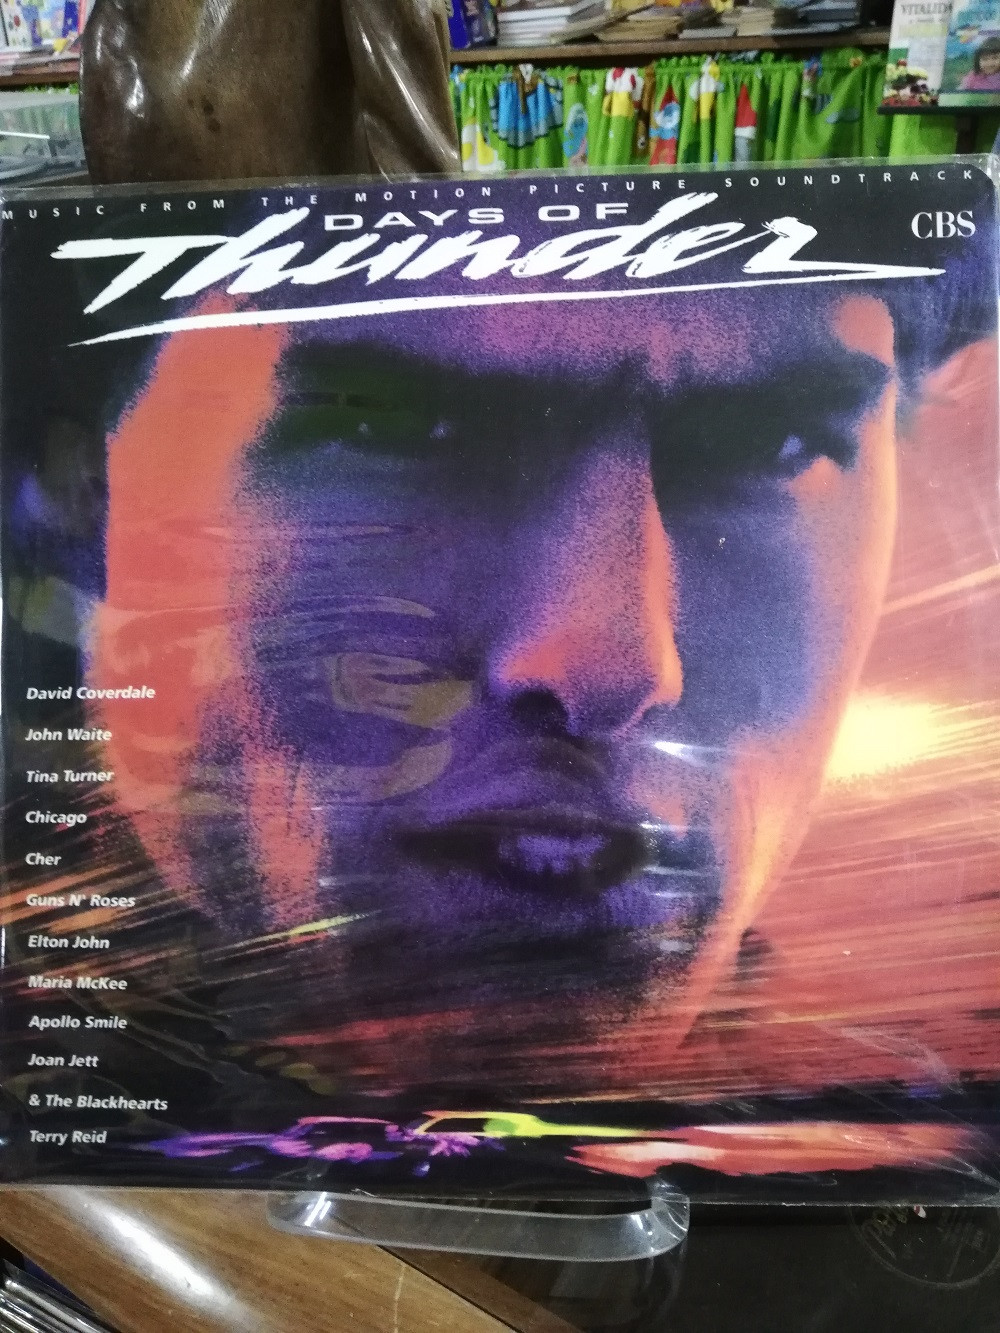 Imagen LP DAYS OF THUNDER - MUSIC FROM THE MOTION PICTURE SOUNDTRACK 1